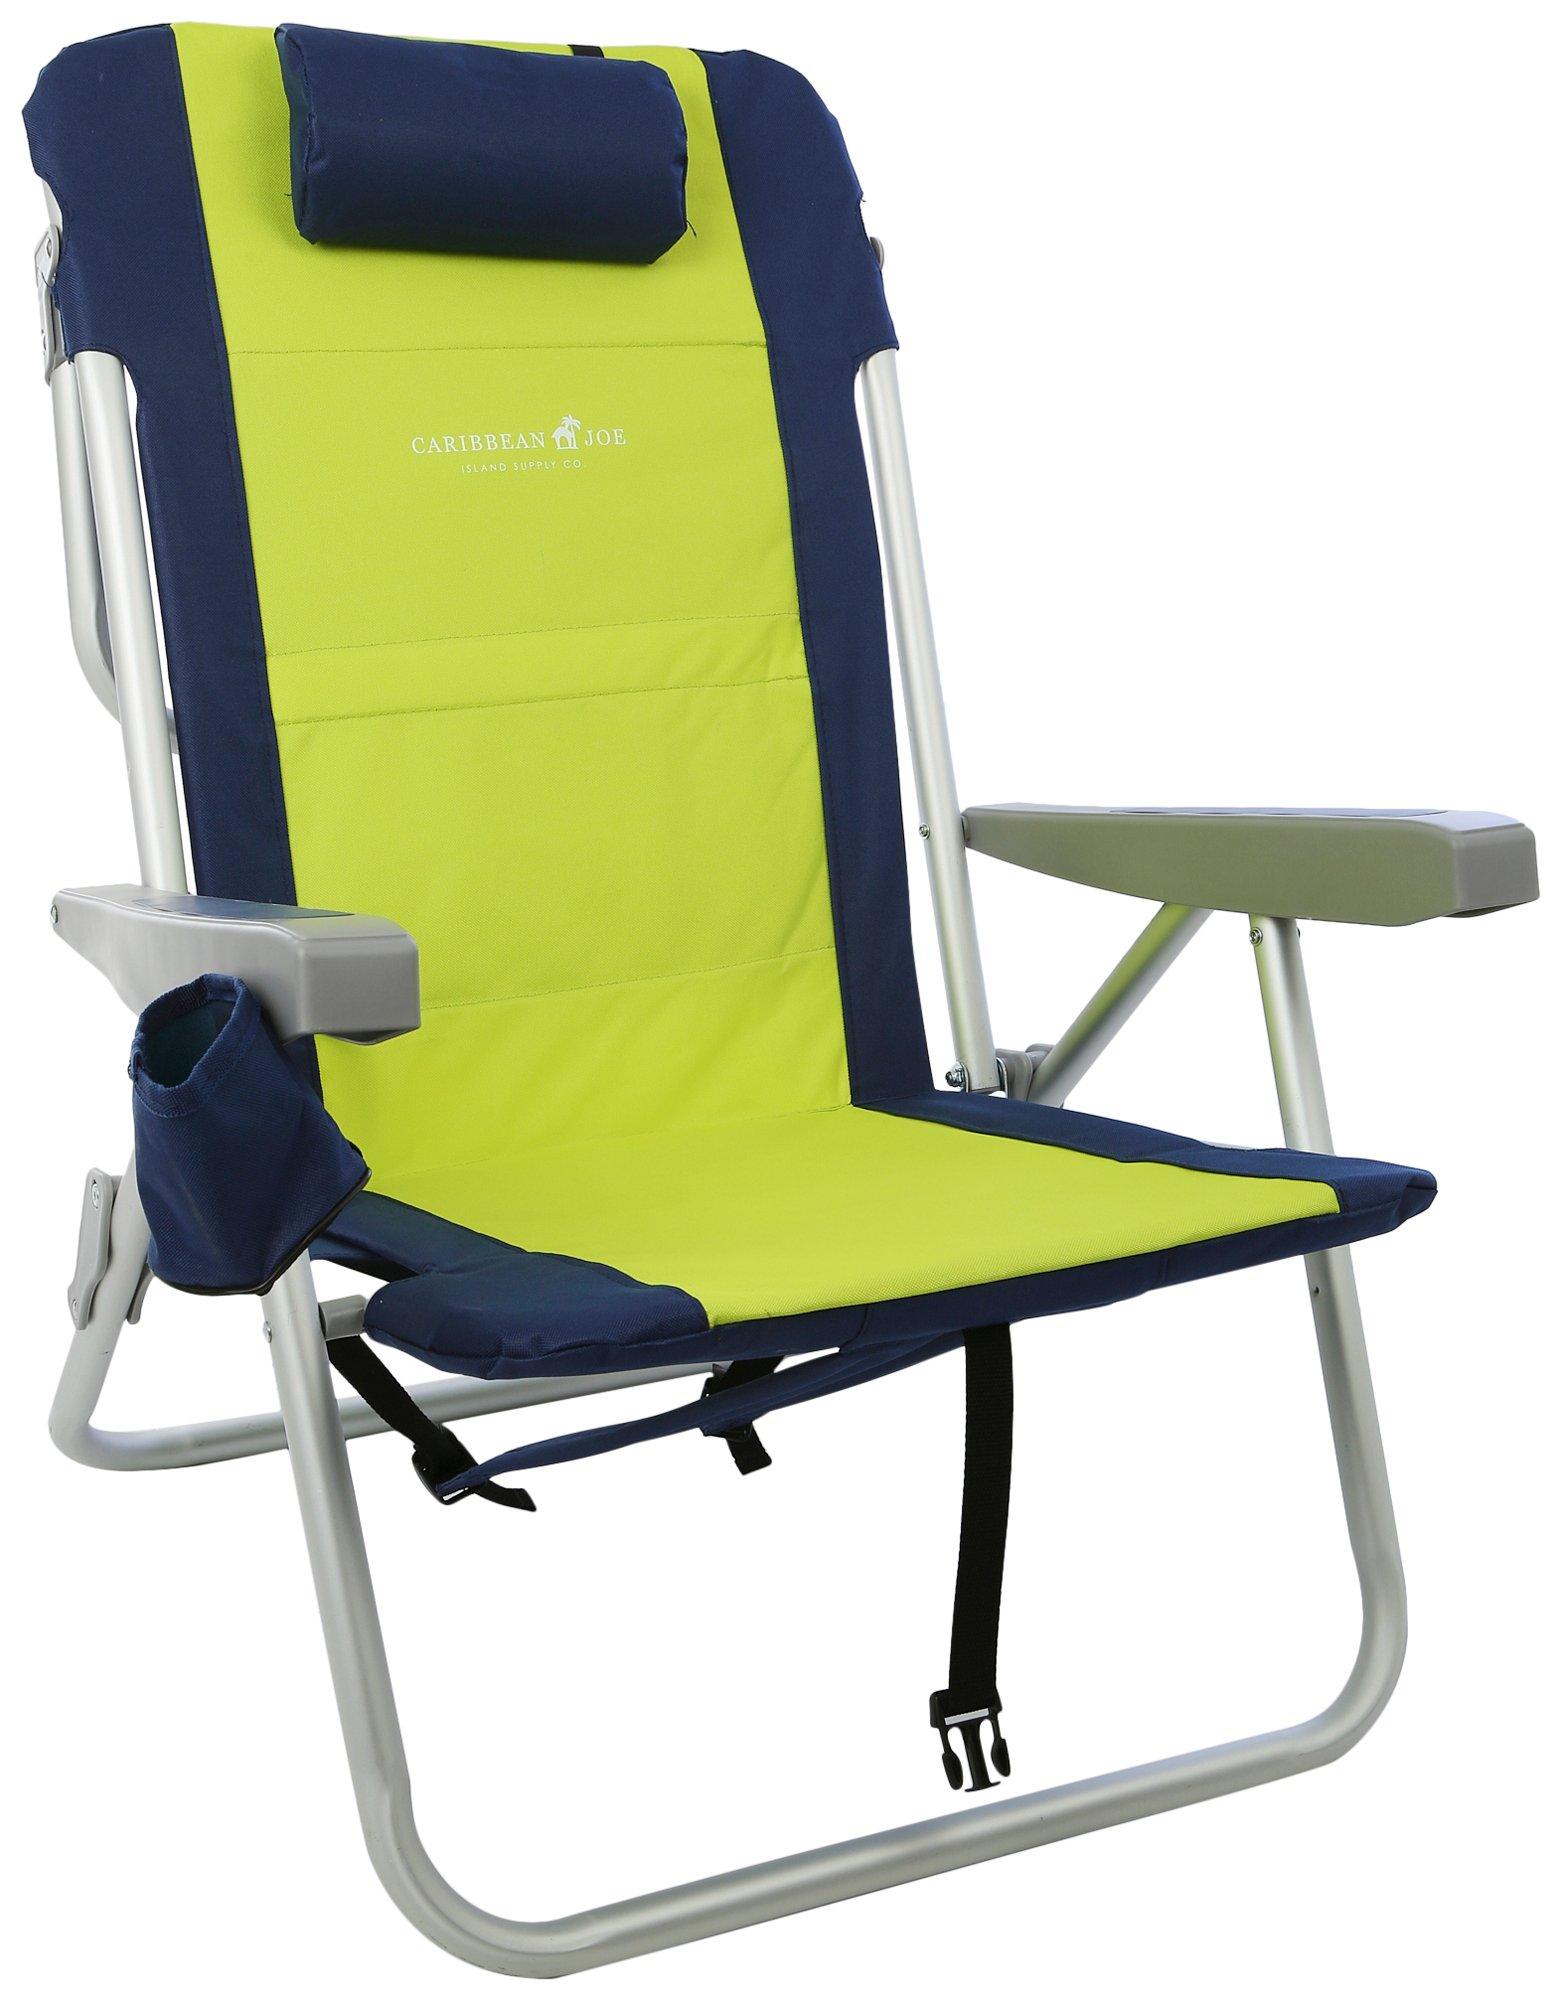 Deluxe Cooler Back Pack Chair